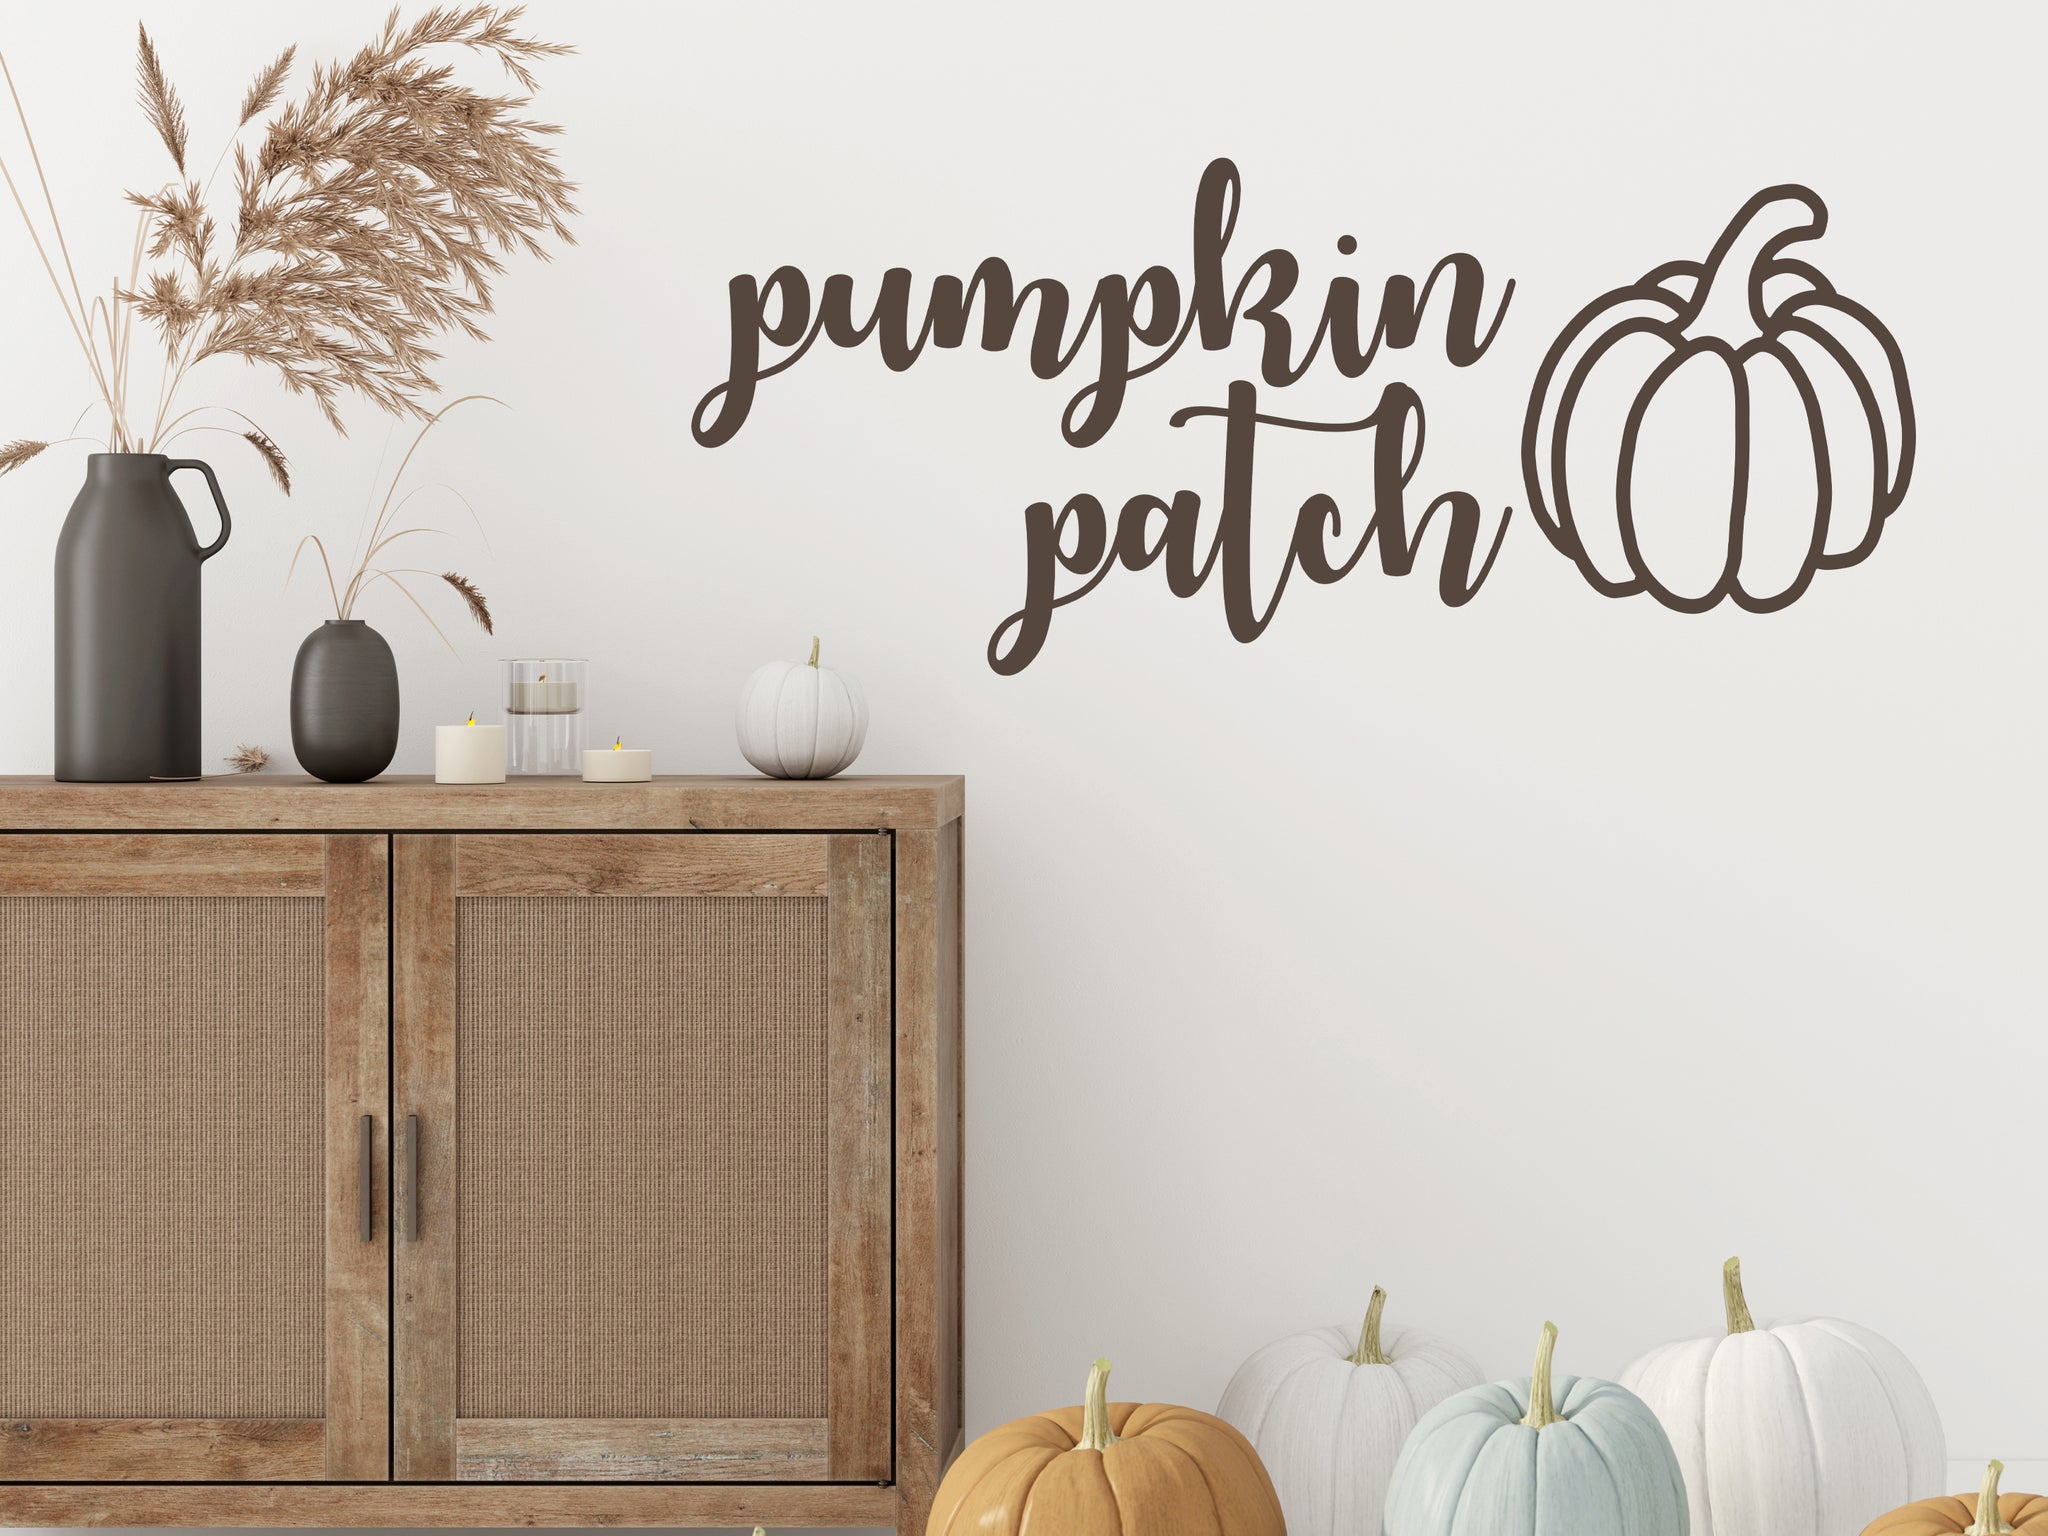 Pumpkin Patch Cursive  Living Room Wall Decal - Story of Home Decals